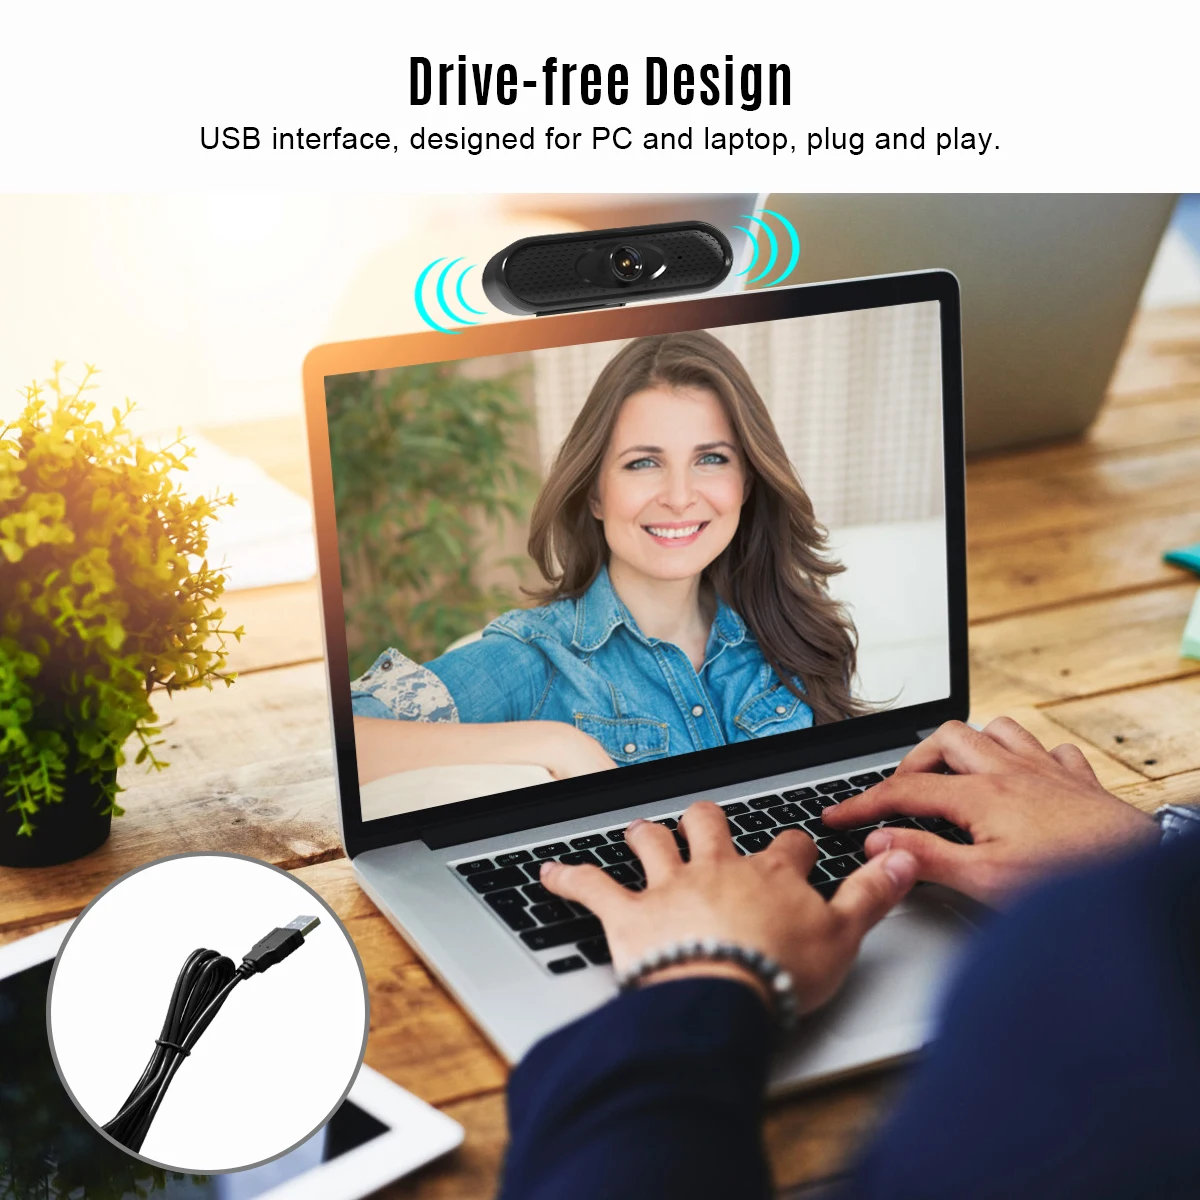 

USB Webcam 1080P/720P Web Camera Built-in Noise Reduction Microphone for PC Desktop Conferencing Live Streaming Online Teaching